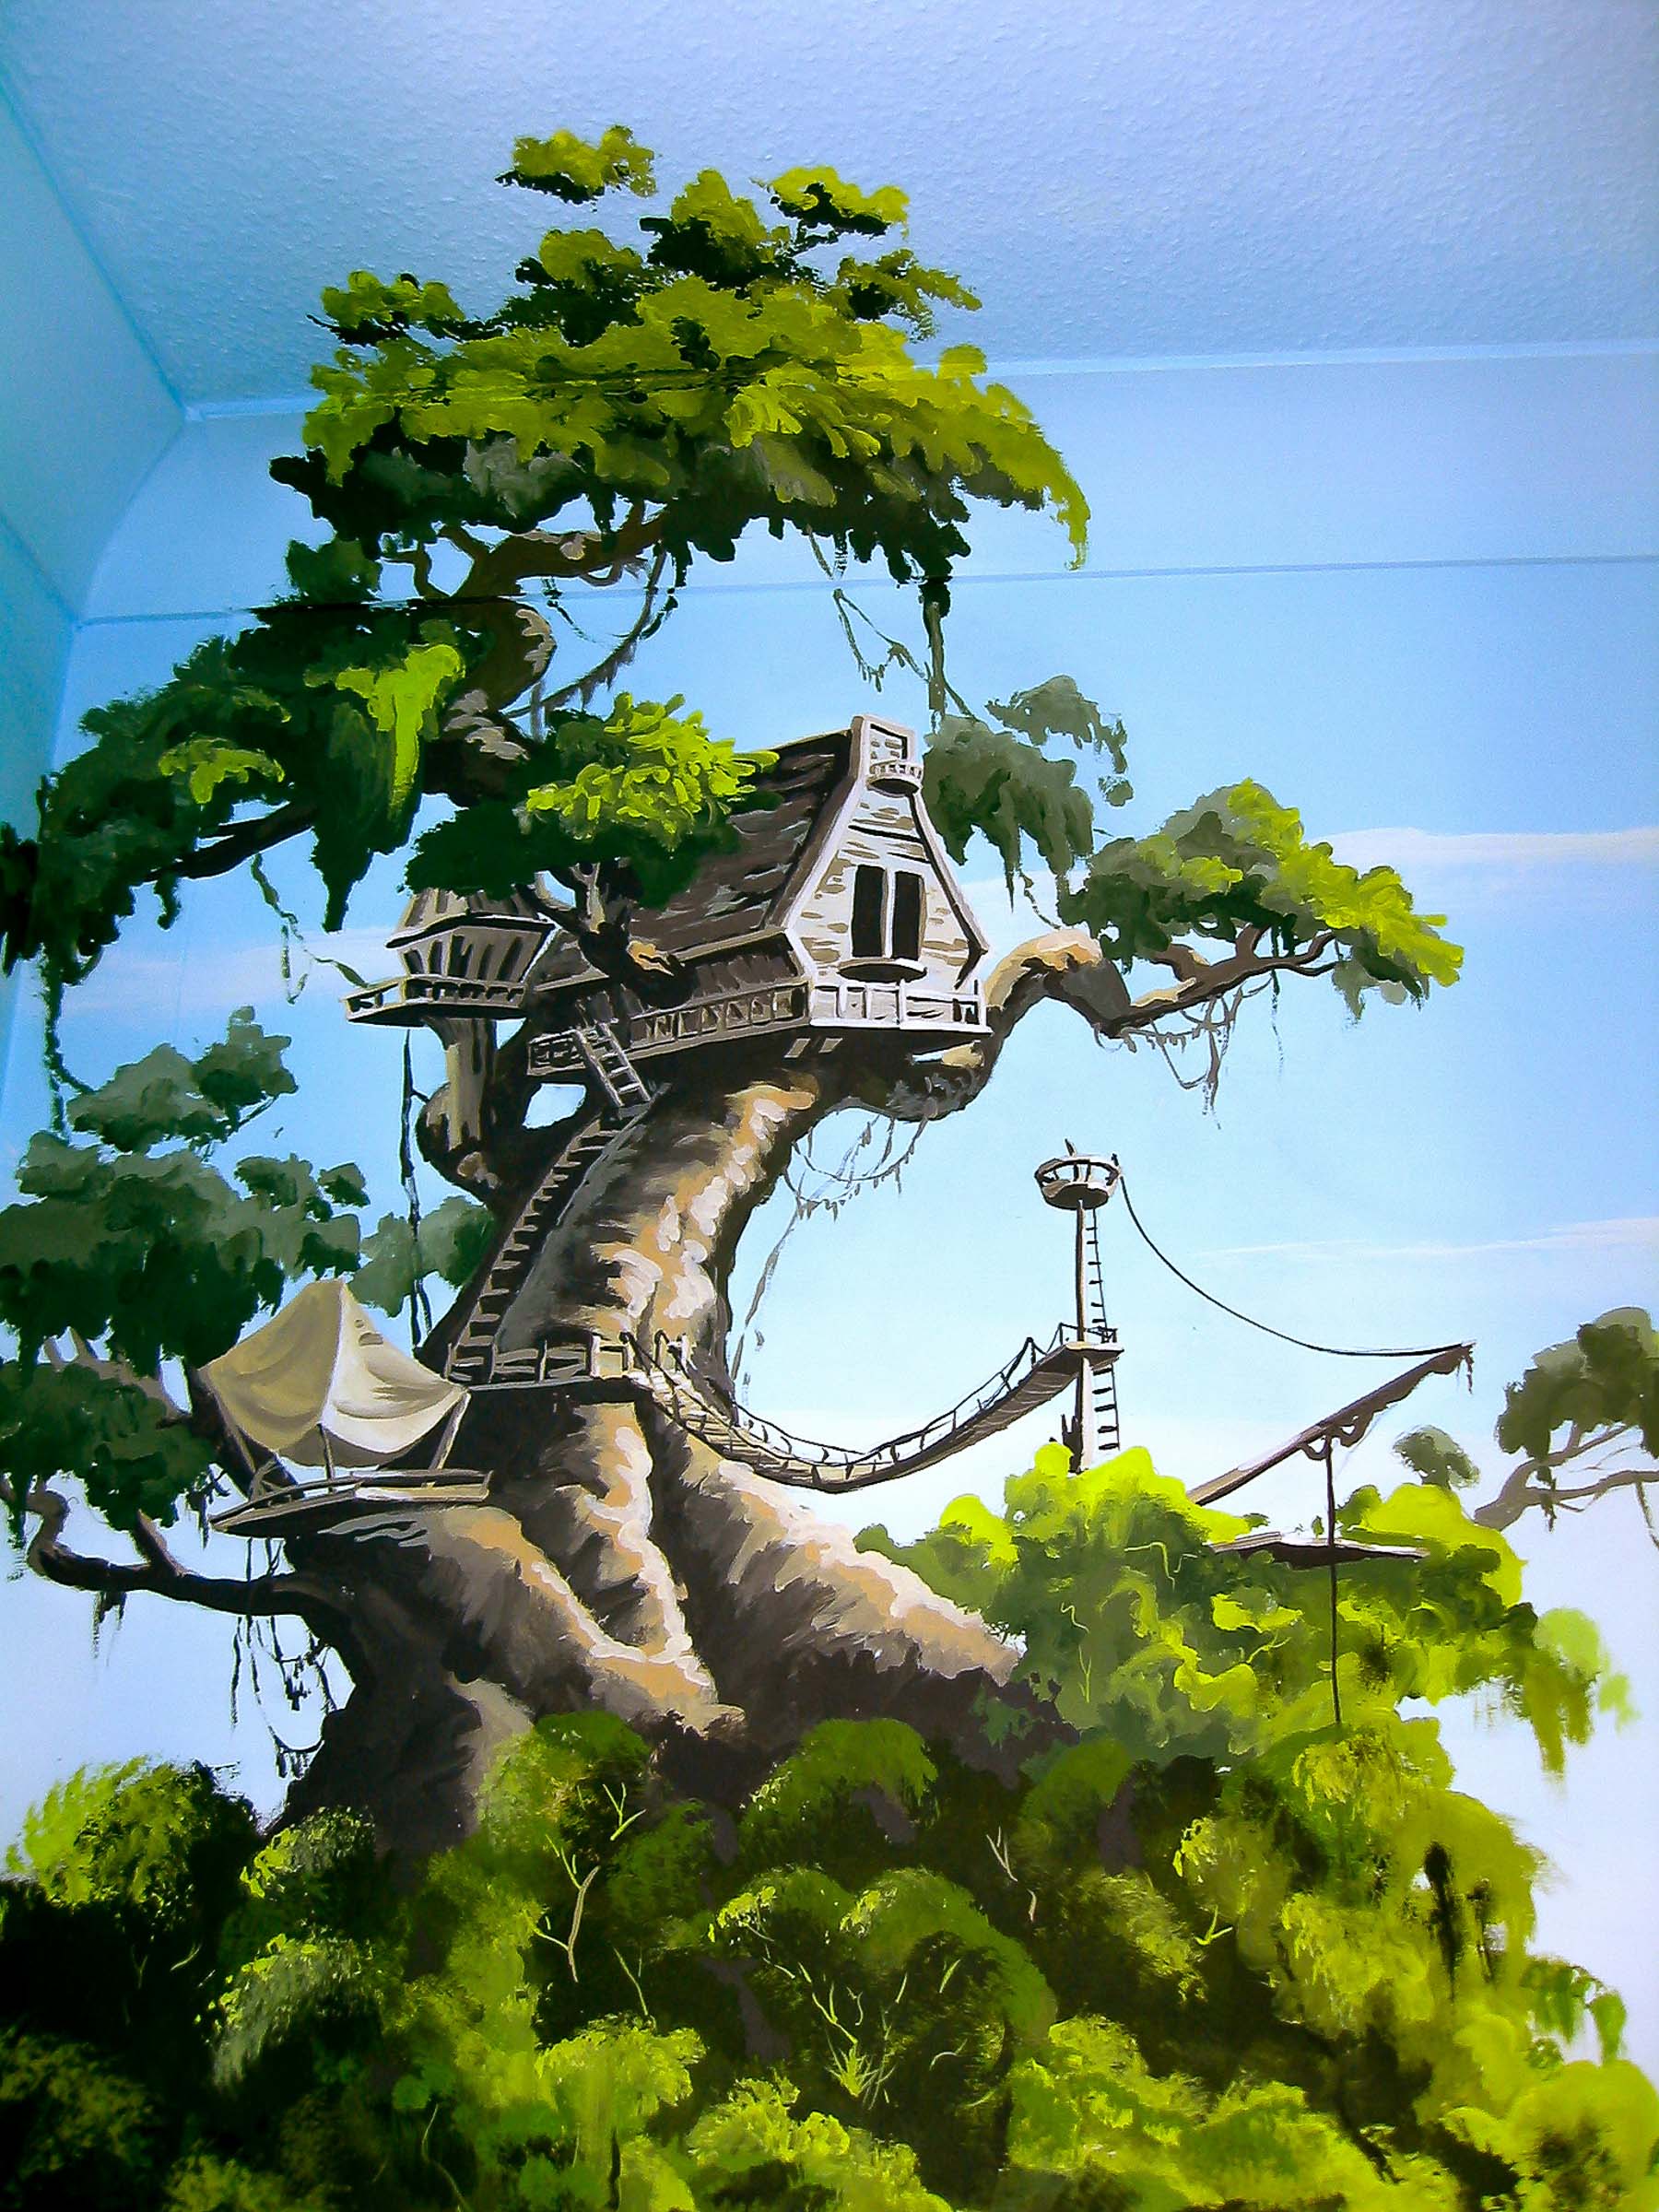 Treehouse in the jungle in this part of the jungle mural